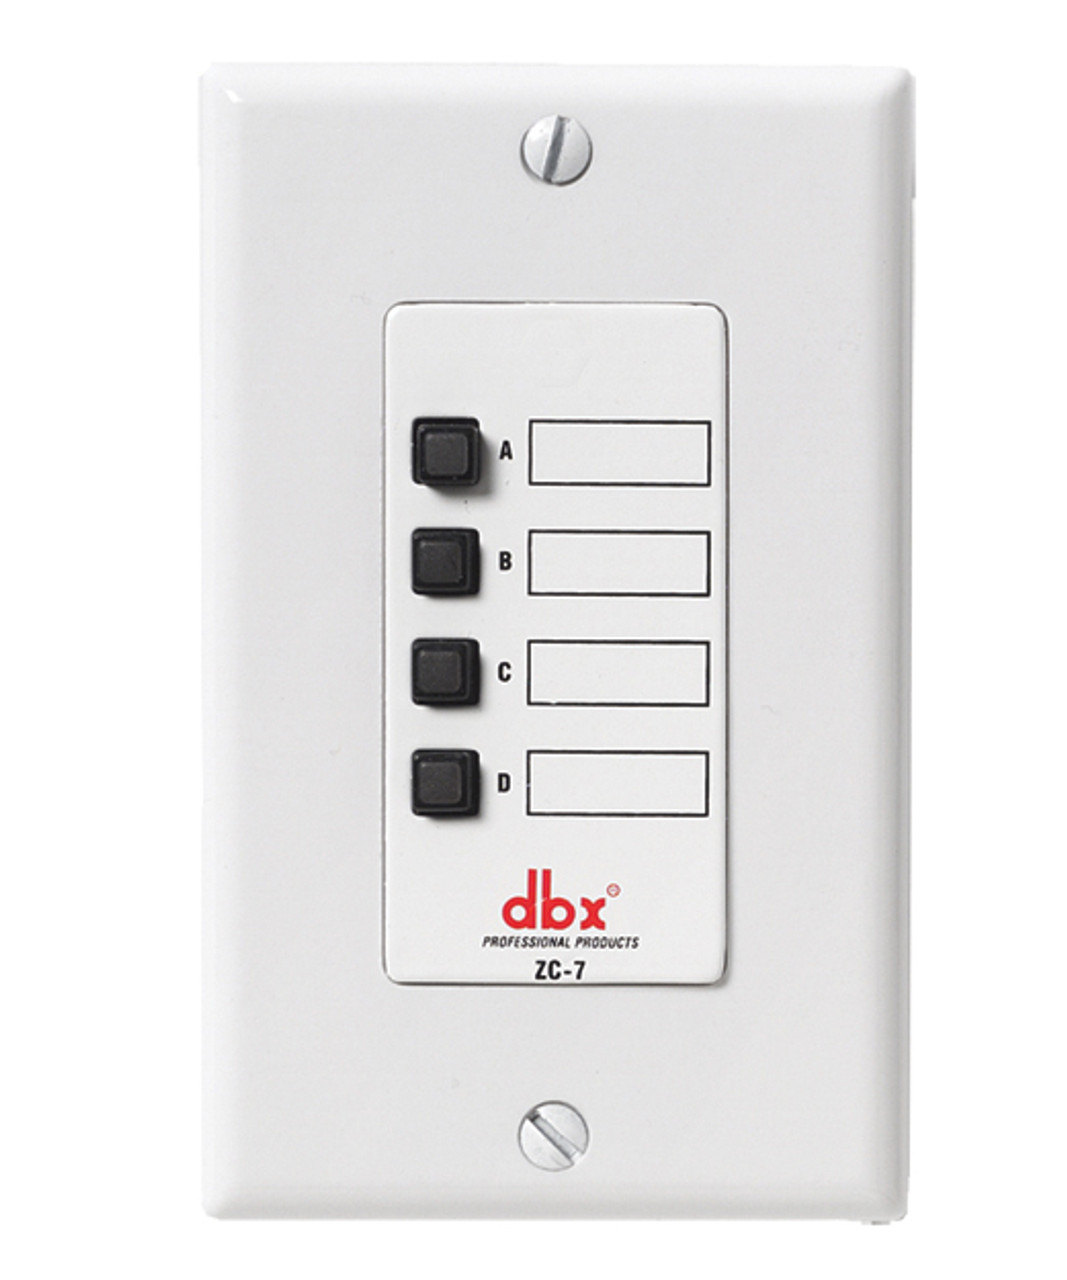 DBX DBXZC7V Seven Wall Mounted Mic Page Assignment Controller 